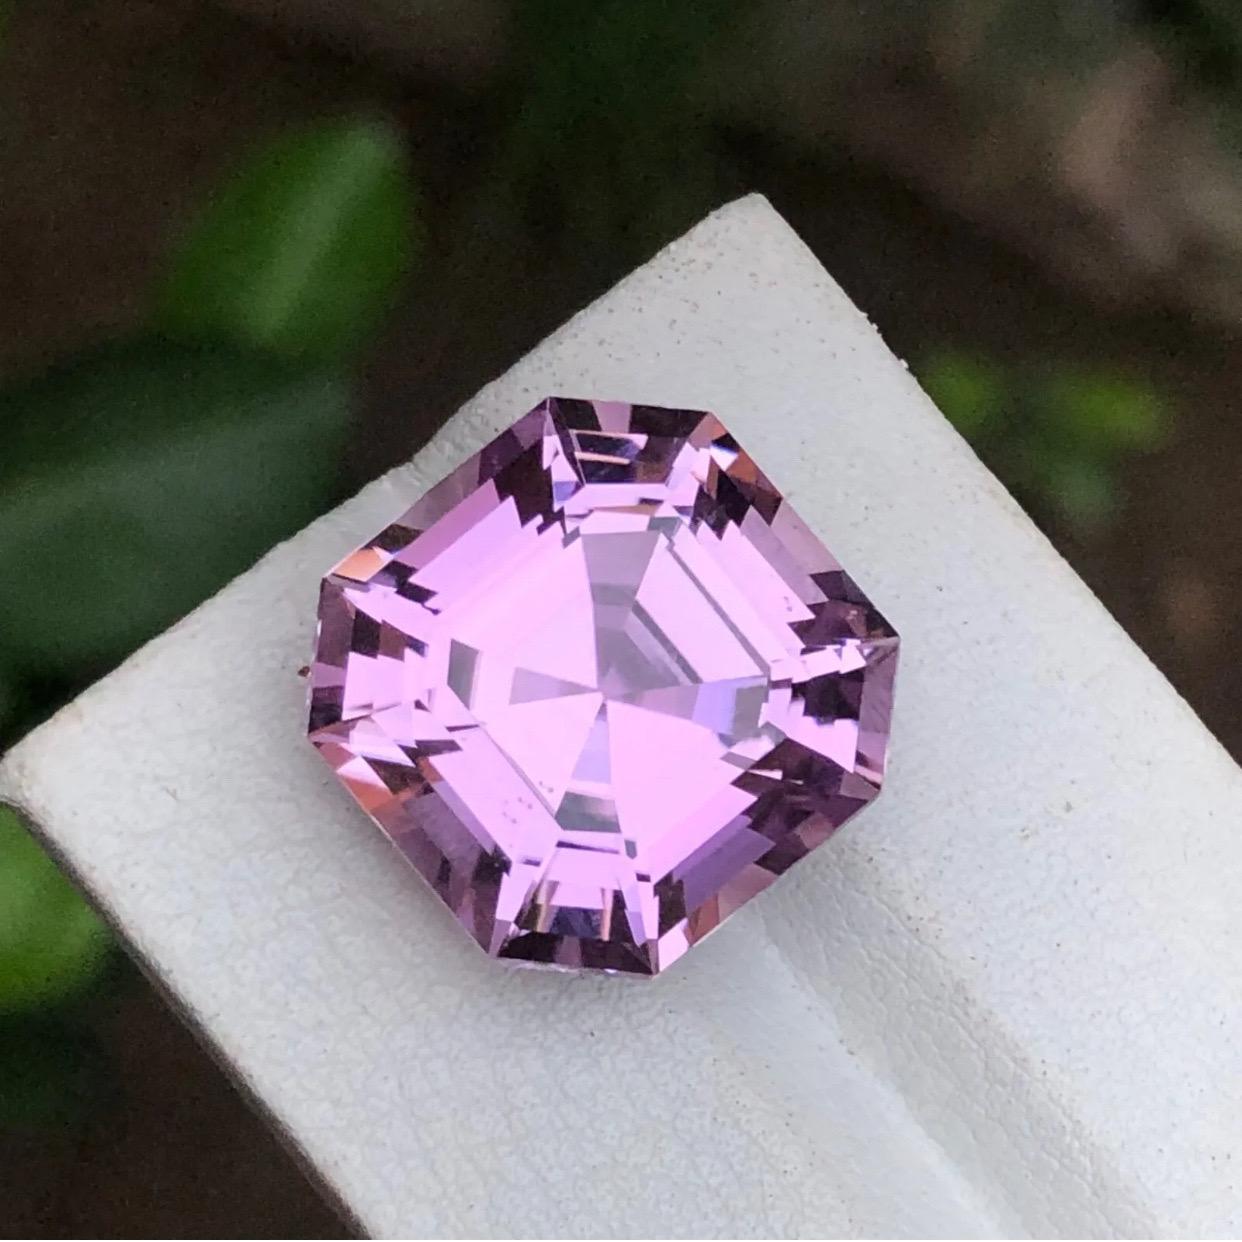 Gemstone Type: Kunzite
Weight: 20.75 Carats
Dimensions: 16.33 x 16.33 x 11.08
Color: Purple, Lavender
Clarity: Eye Clean
Treatment: Heated
Origin: Afghanistan
Certificate: On demand 

Behold the epitome of elegance and allure – a mesmerizing 20.75